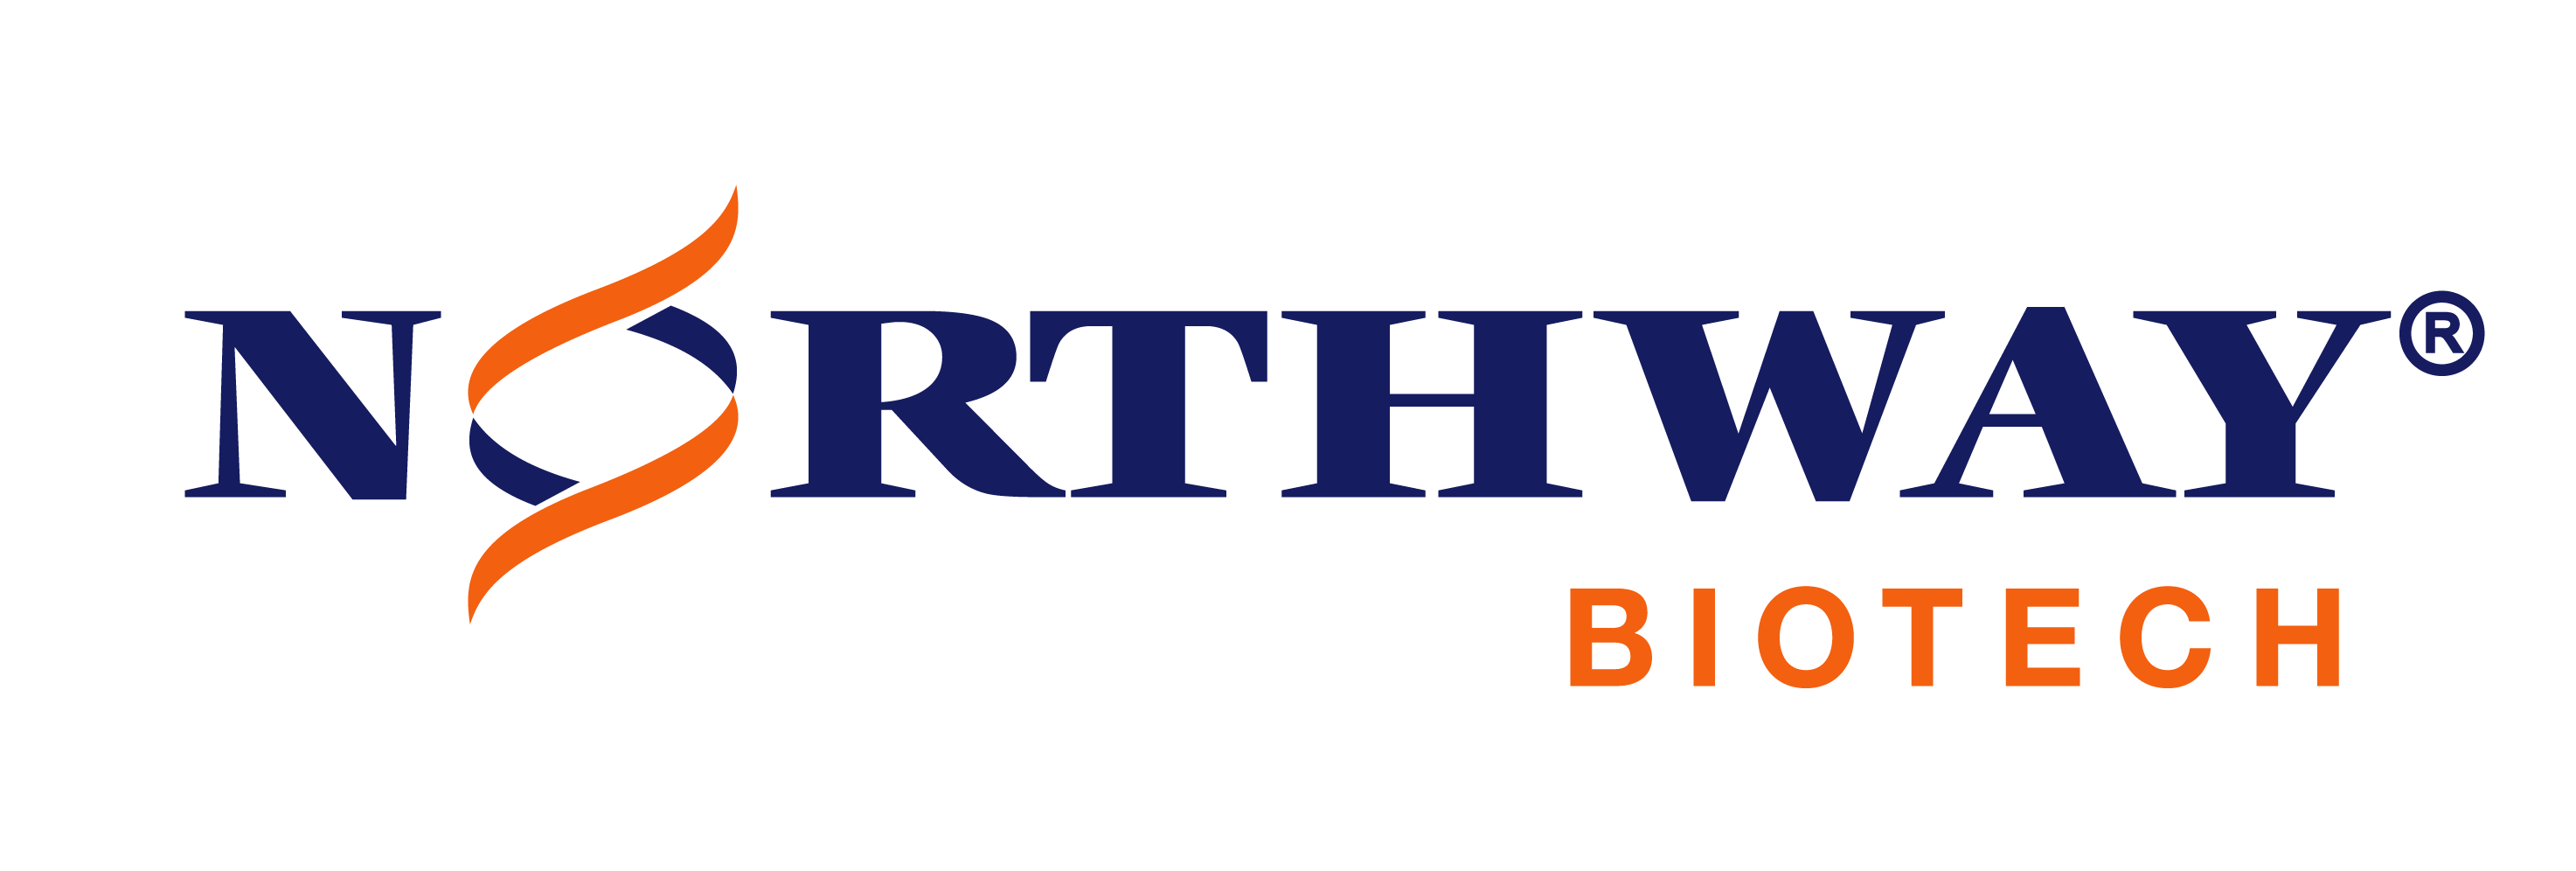 Northway Biotech Set to Launch Advanced Microbial and Mammalian GMP Facilities in Massachusetts